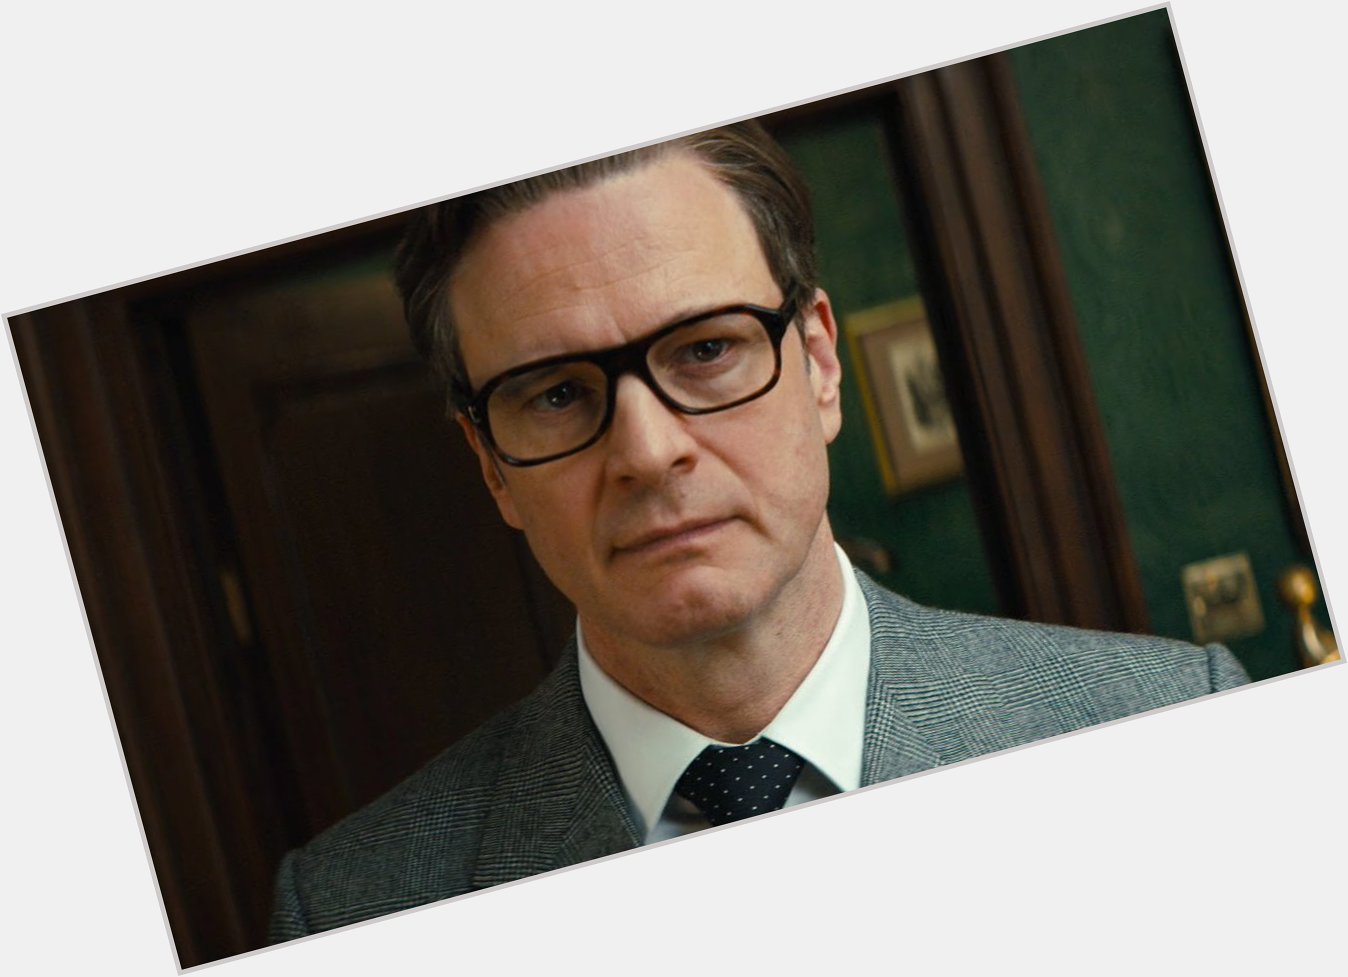 Manners. Maketh. Man. 

Wishing a happy birthday to the classiest Colin Firth! 